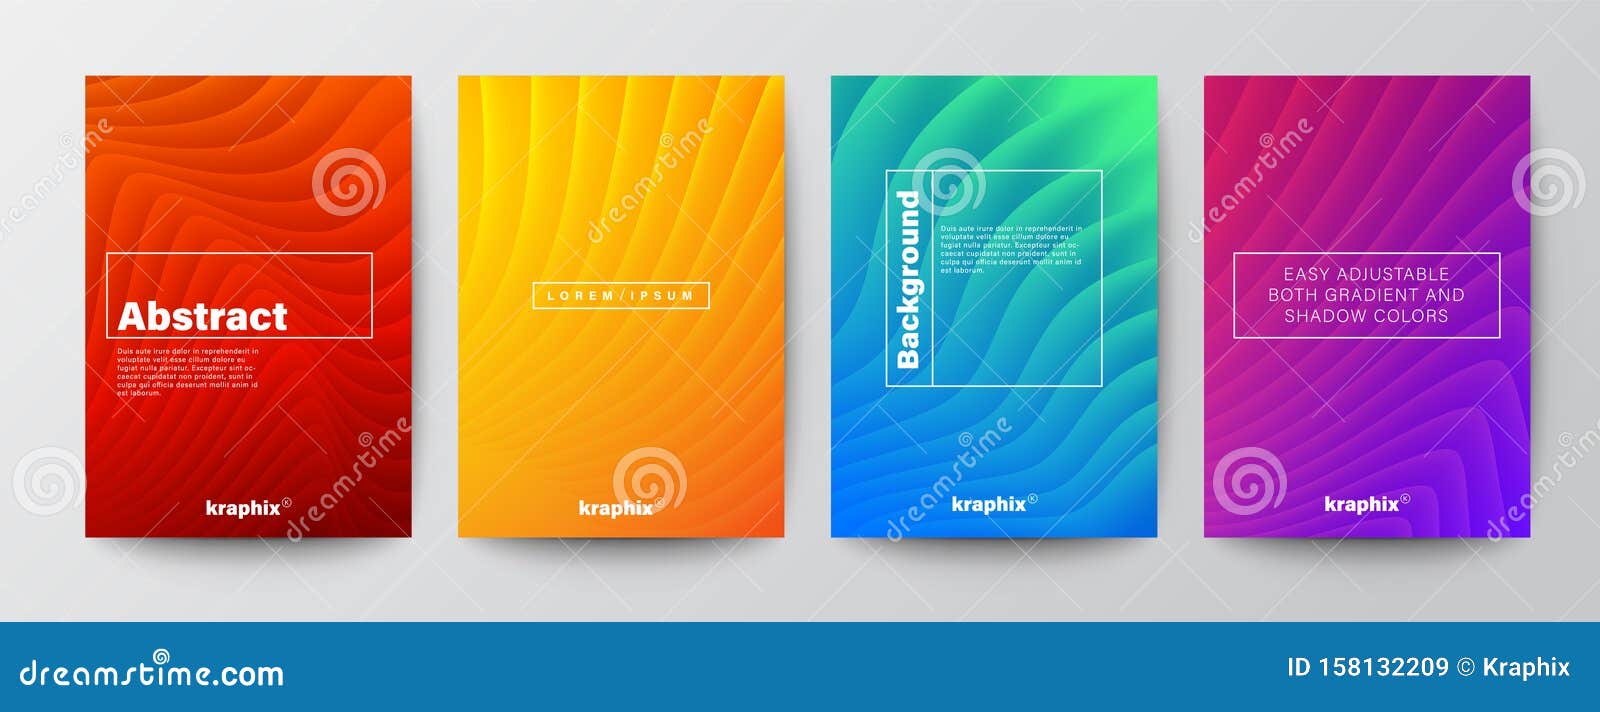 minimal abstract organic curved wave  on vivid gradient colors background for brochure, flyer, poster, leaflet, book cover